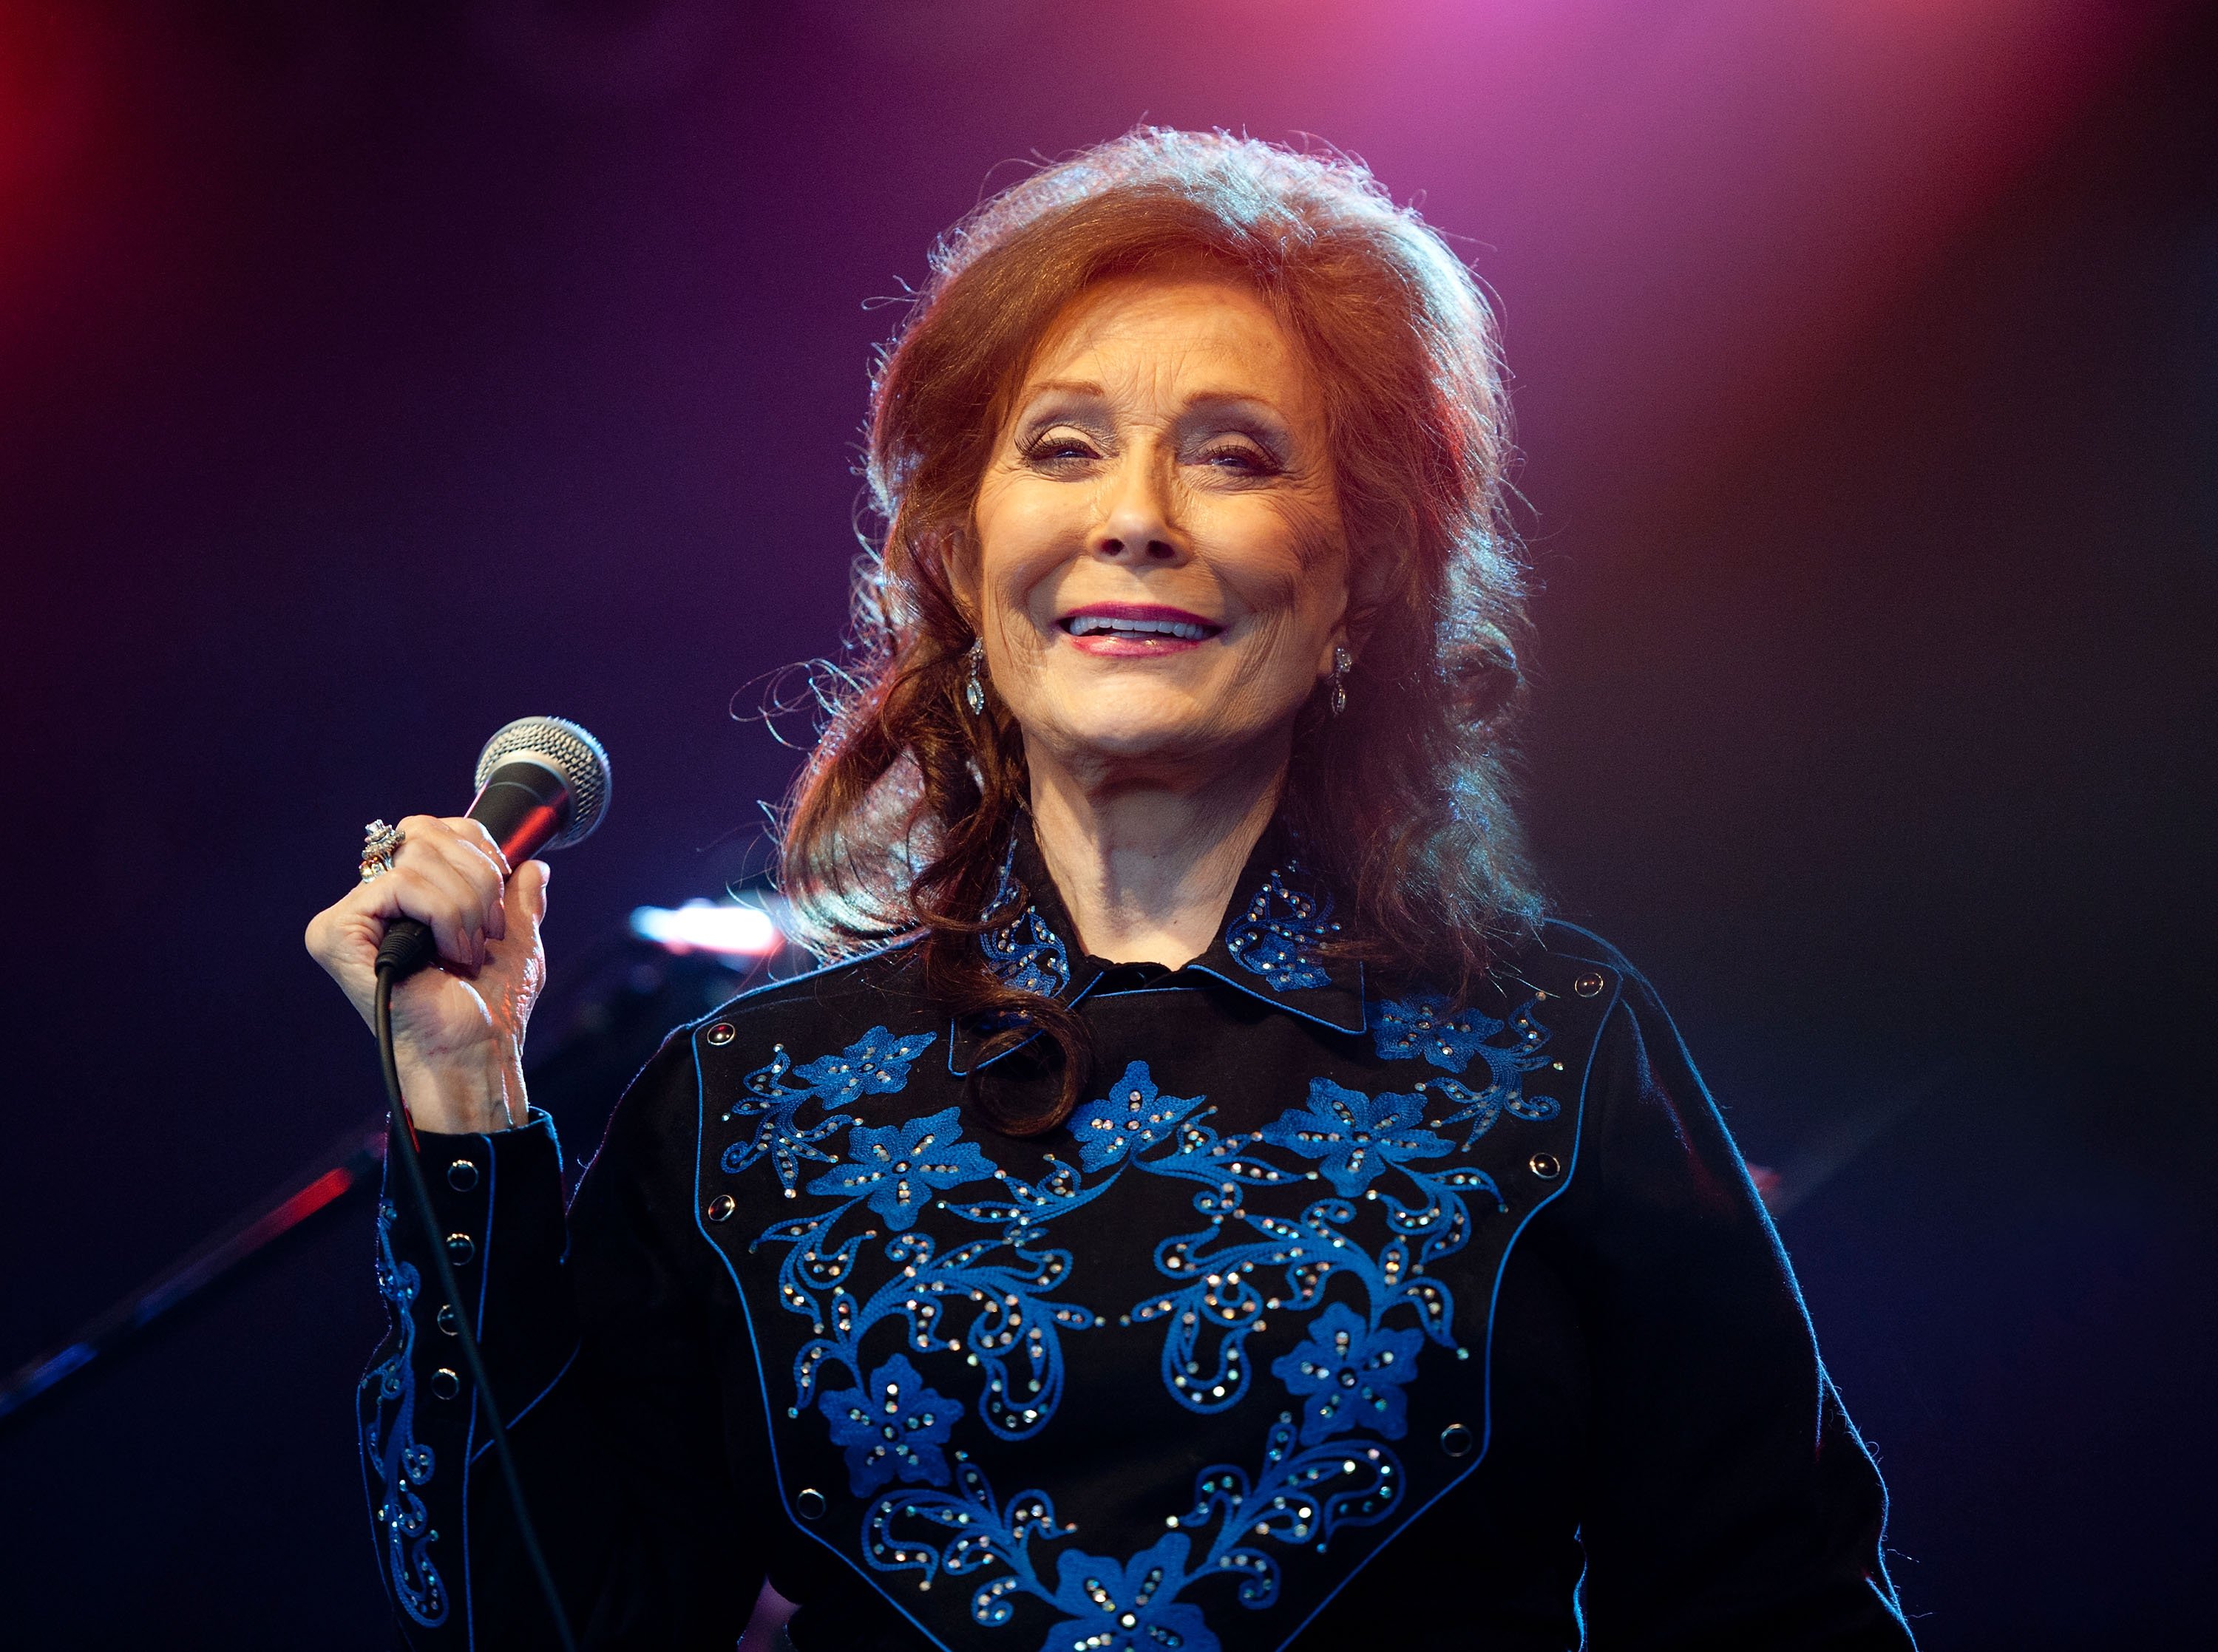 Loretta Lynn performing at the 2011 Bonnaroo Music and Arts Festival on June 11, 2011 in Manchester, Tennessee. | Source: Getty Images